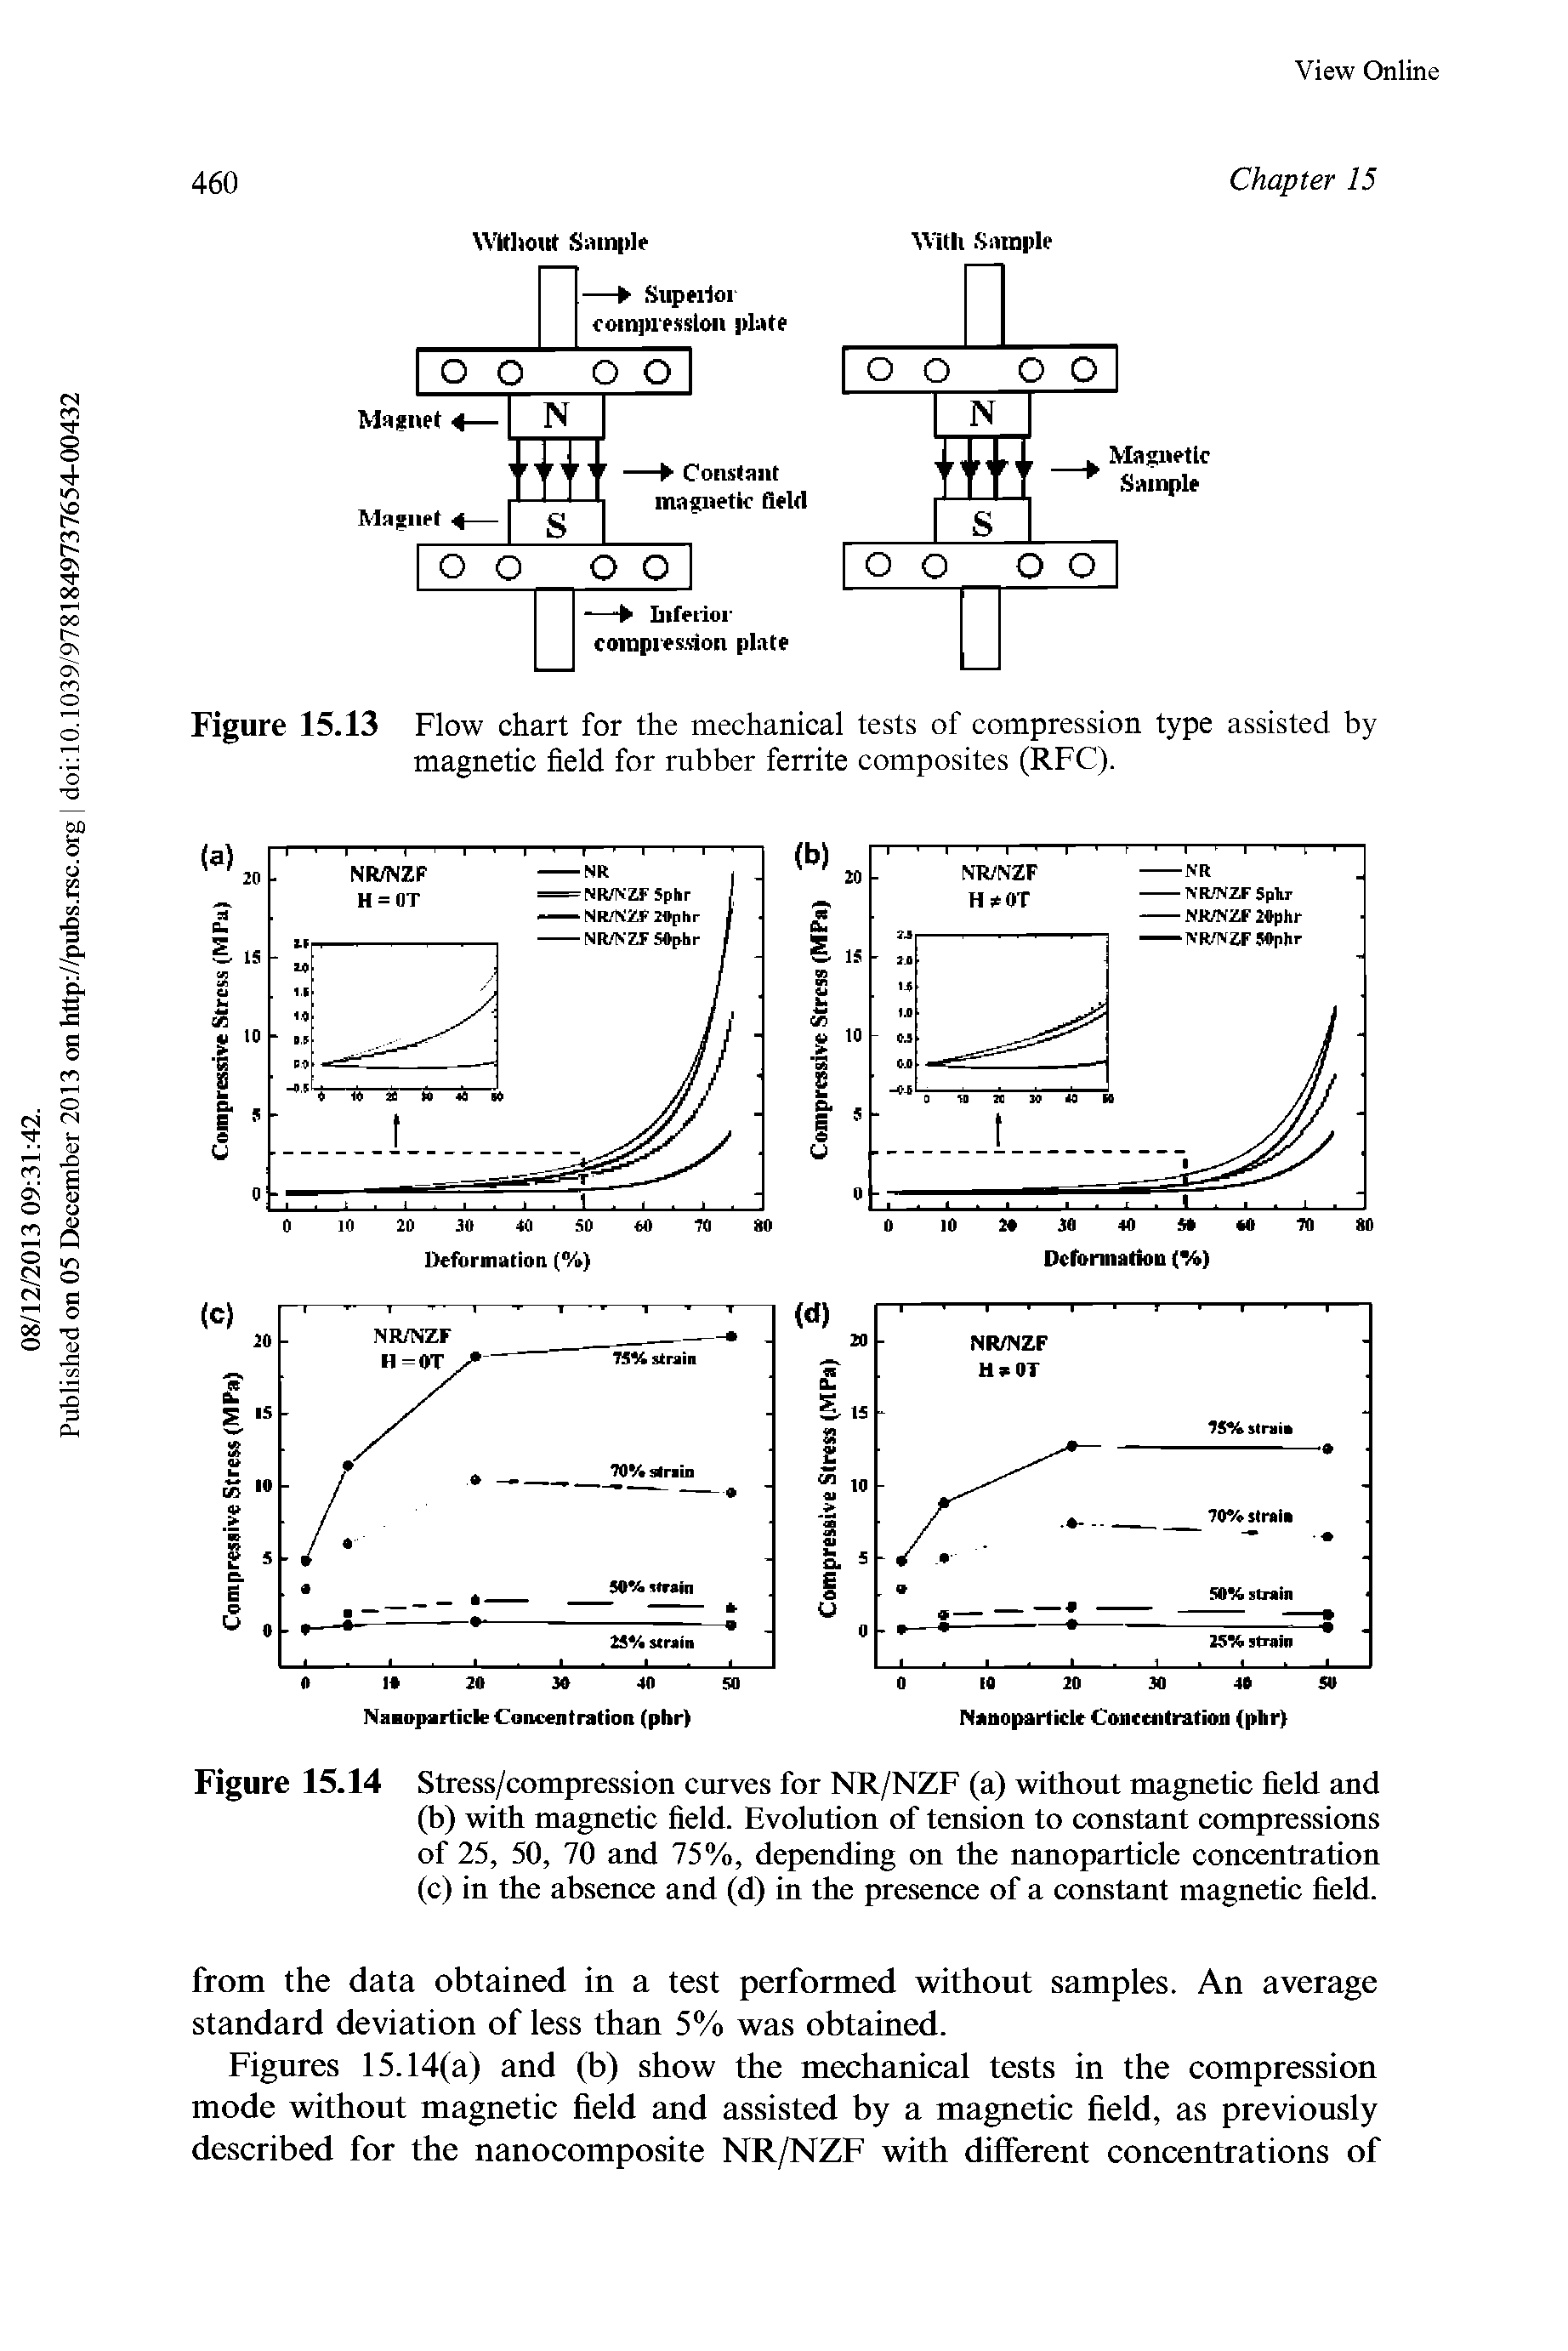 Figure 15.13 Flow chart for the mechanical tests of compression type assisted by magnetic field for rubber ferrite composites (RFC).